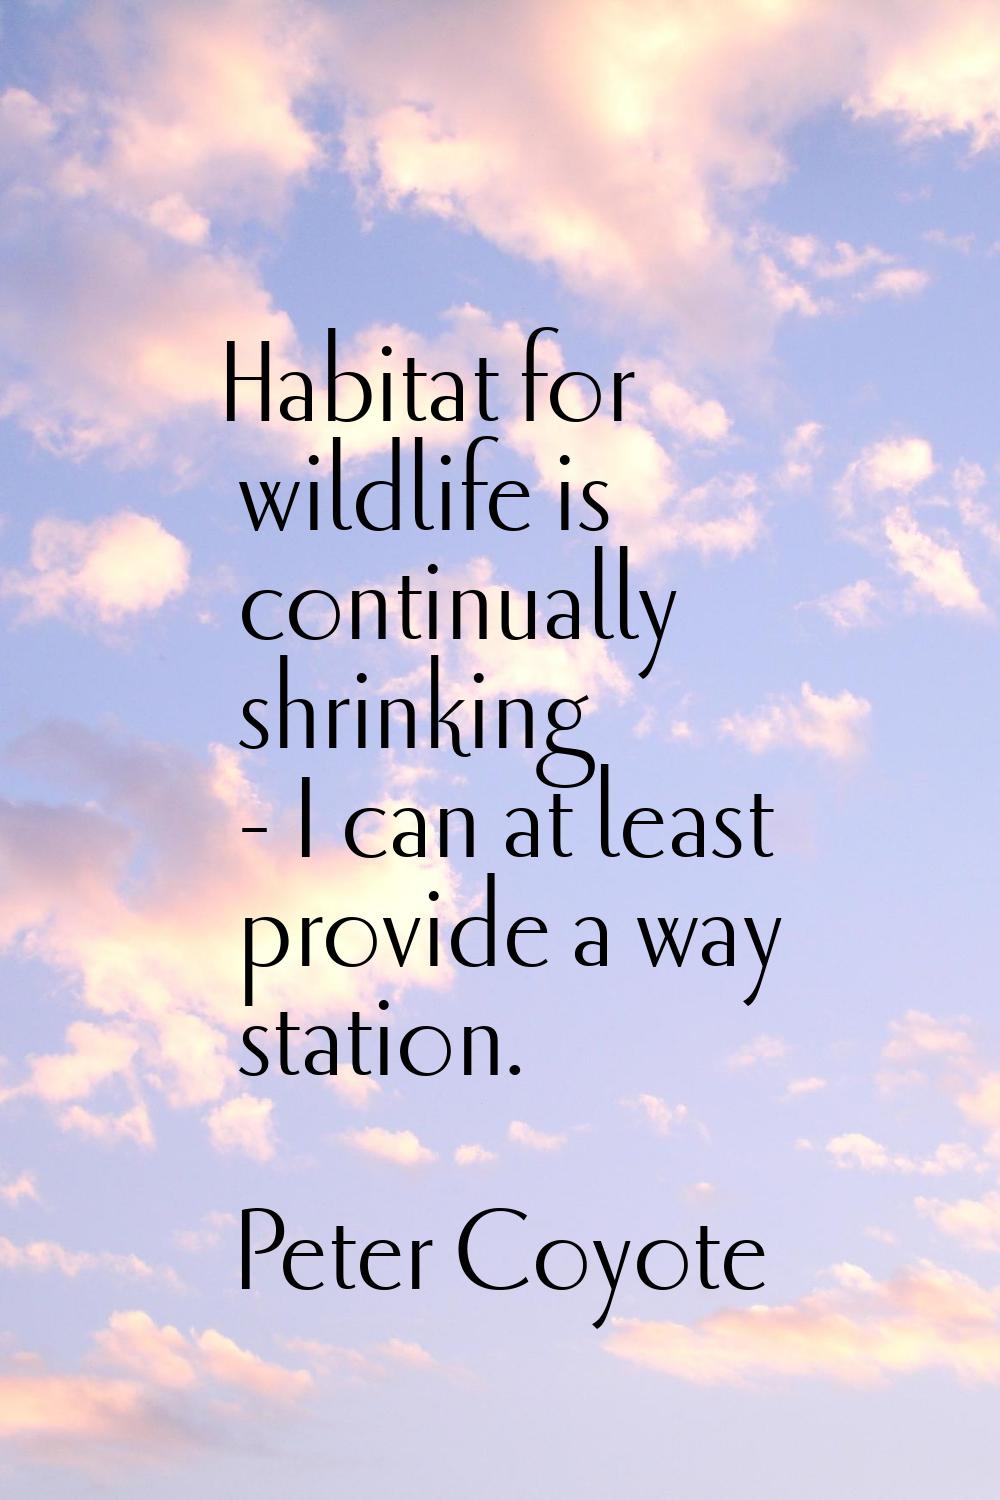 Habitat for wildlife is continually shrinking - I can at least provide a way station.